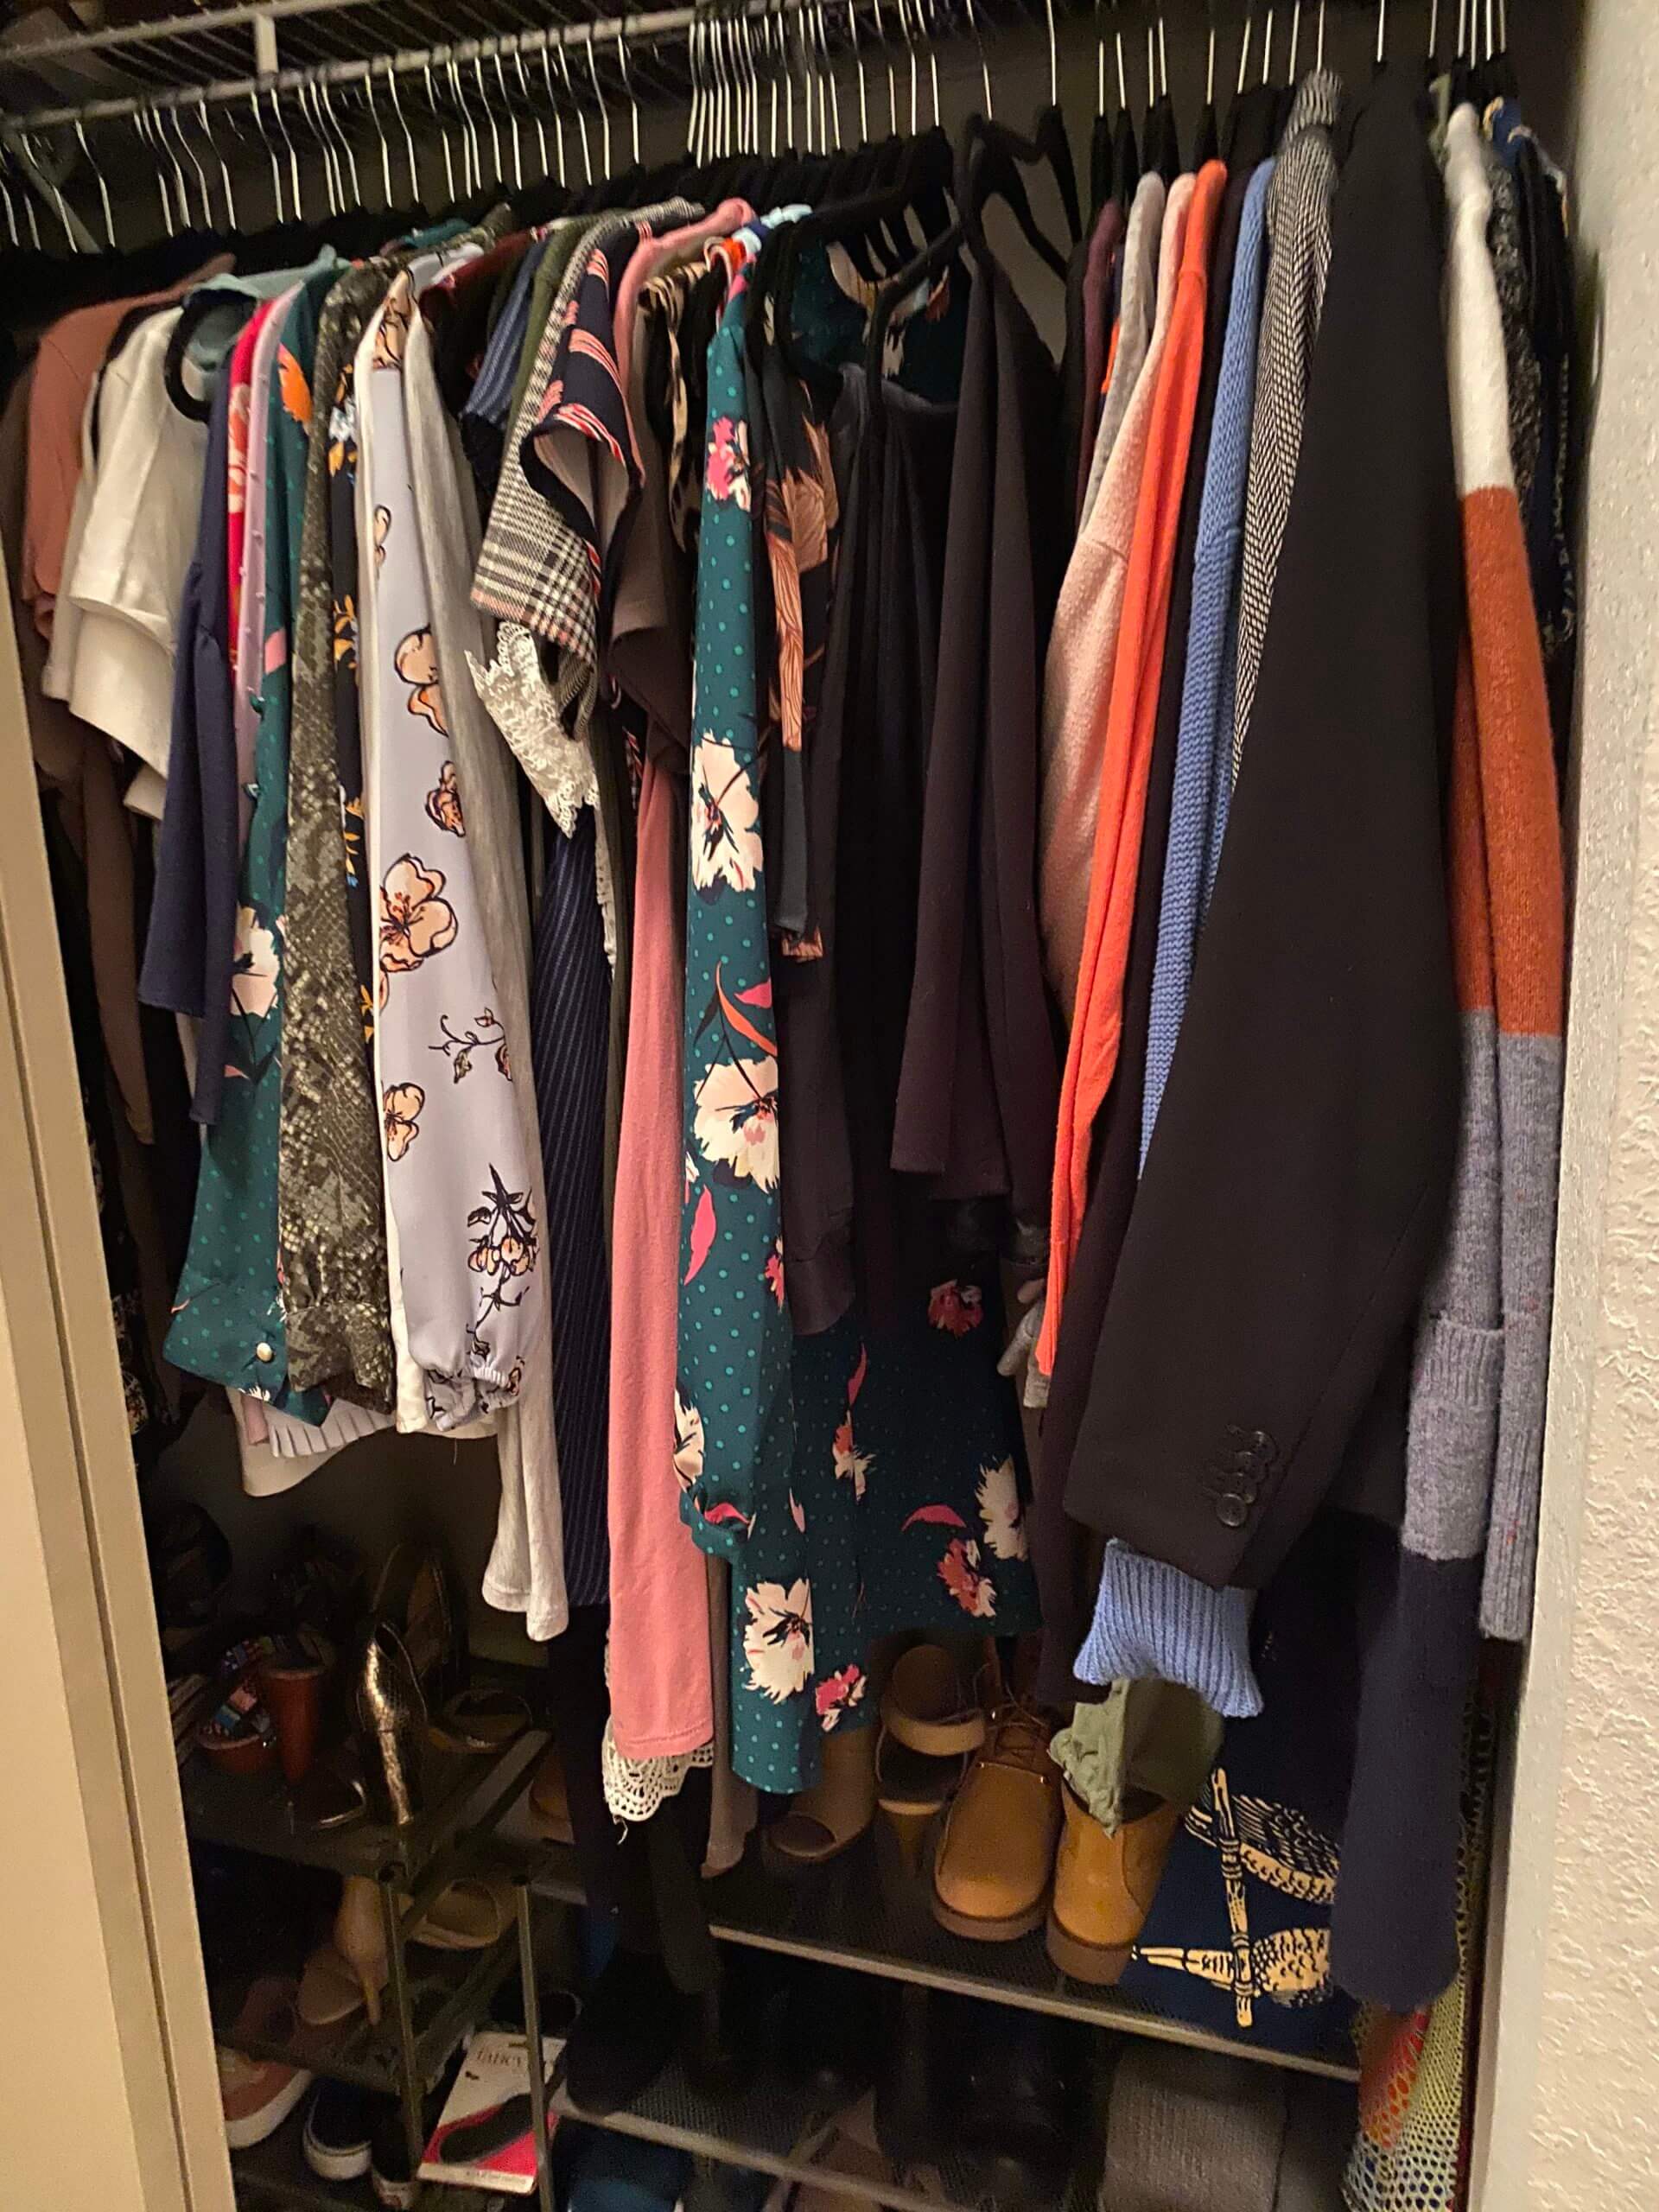 Are you struggling on how to get started decluttering your closet? Let me help! In this blog post, I’m sharing how to declutter your closet in 8 simple tips. 